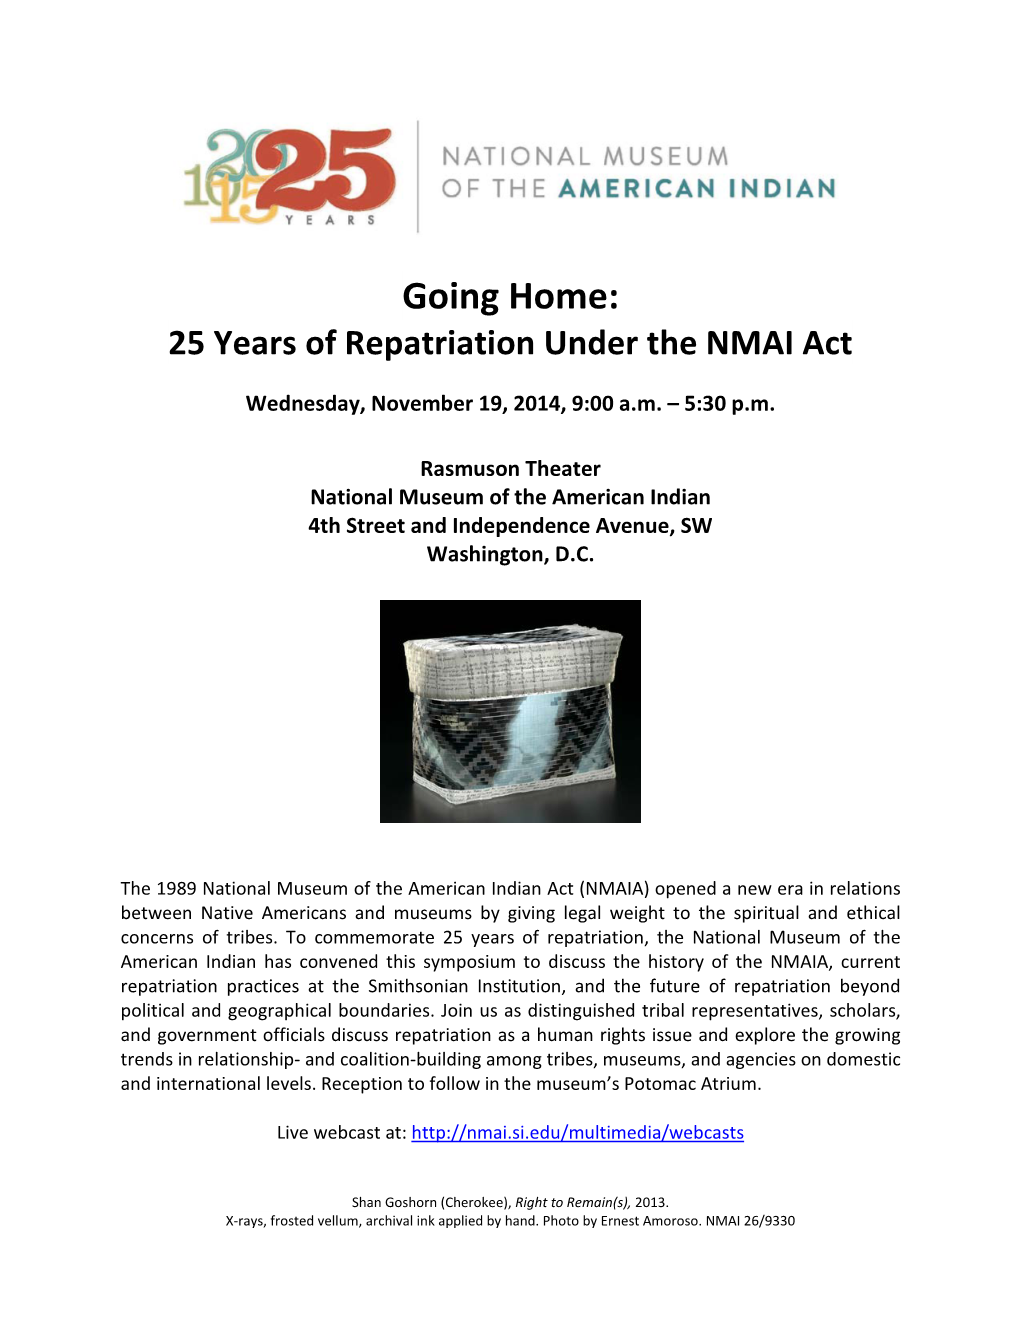 Going Home: 25 Years of Repatriation Under the NMAI Act